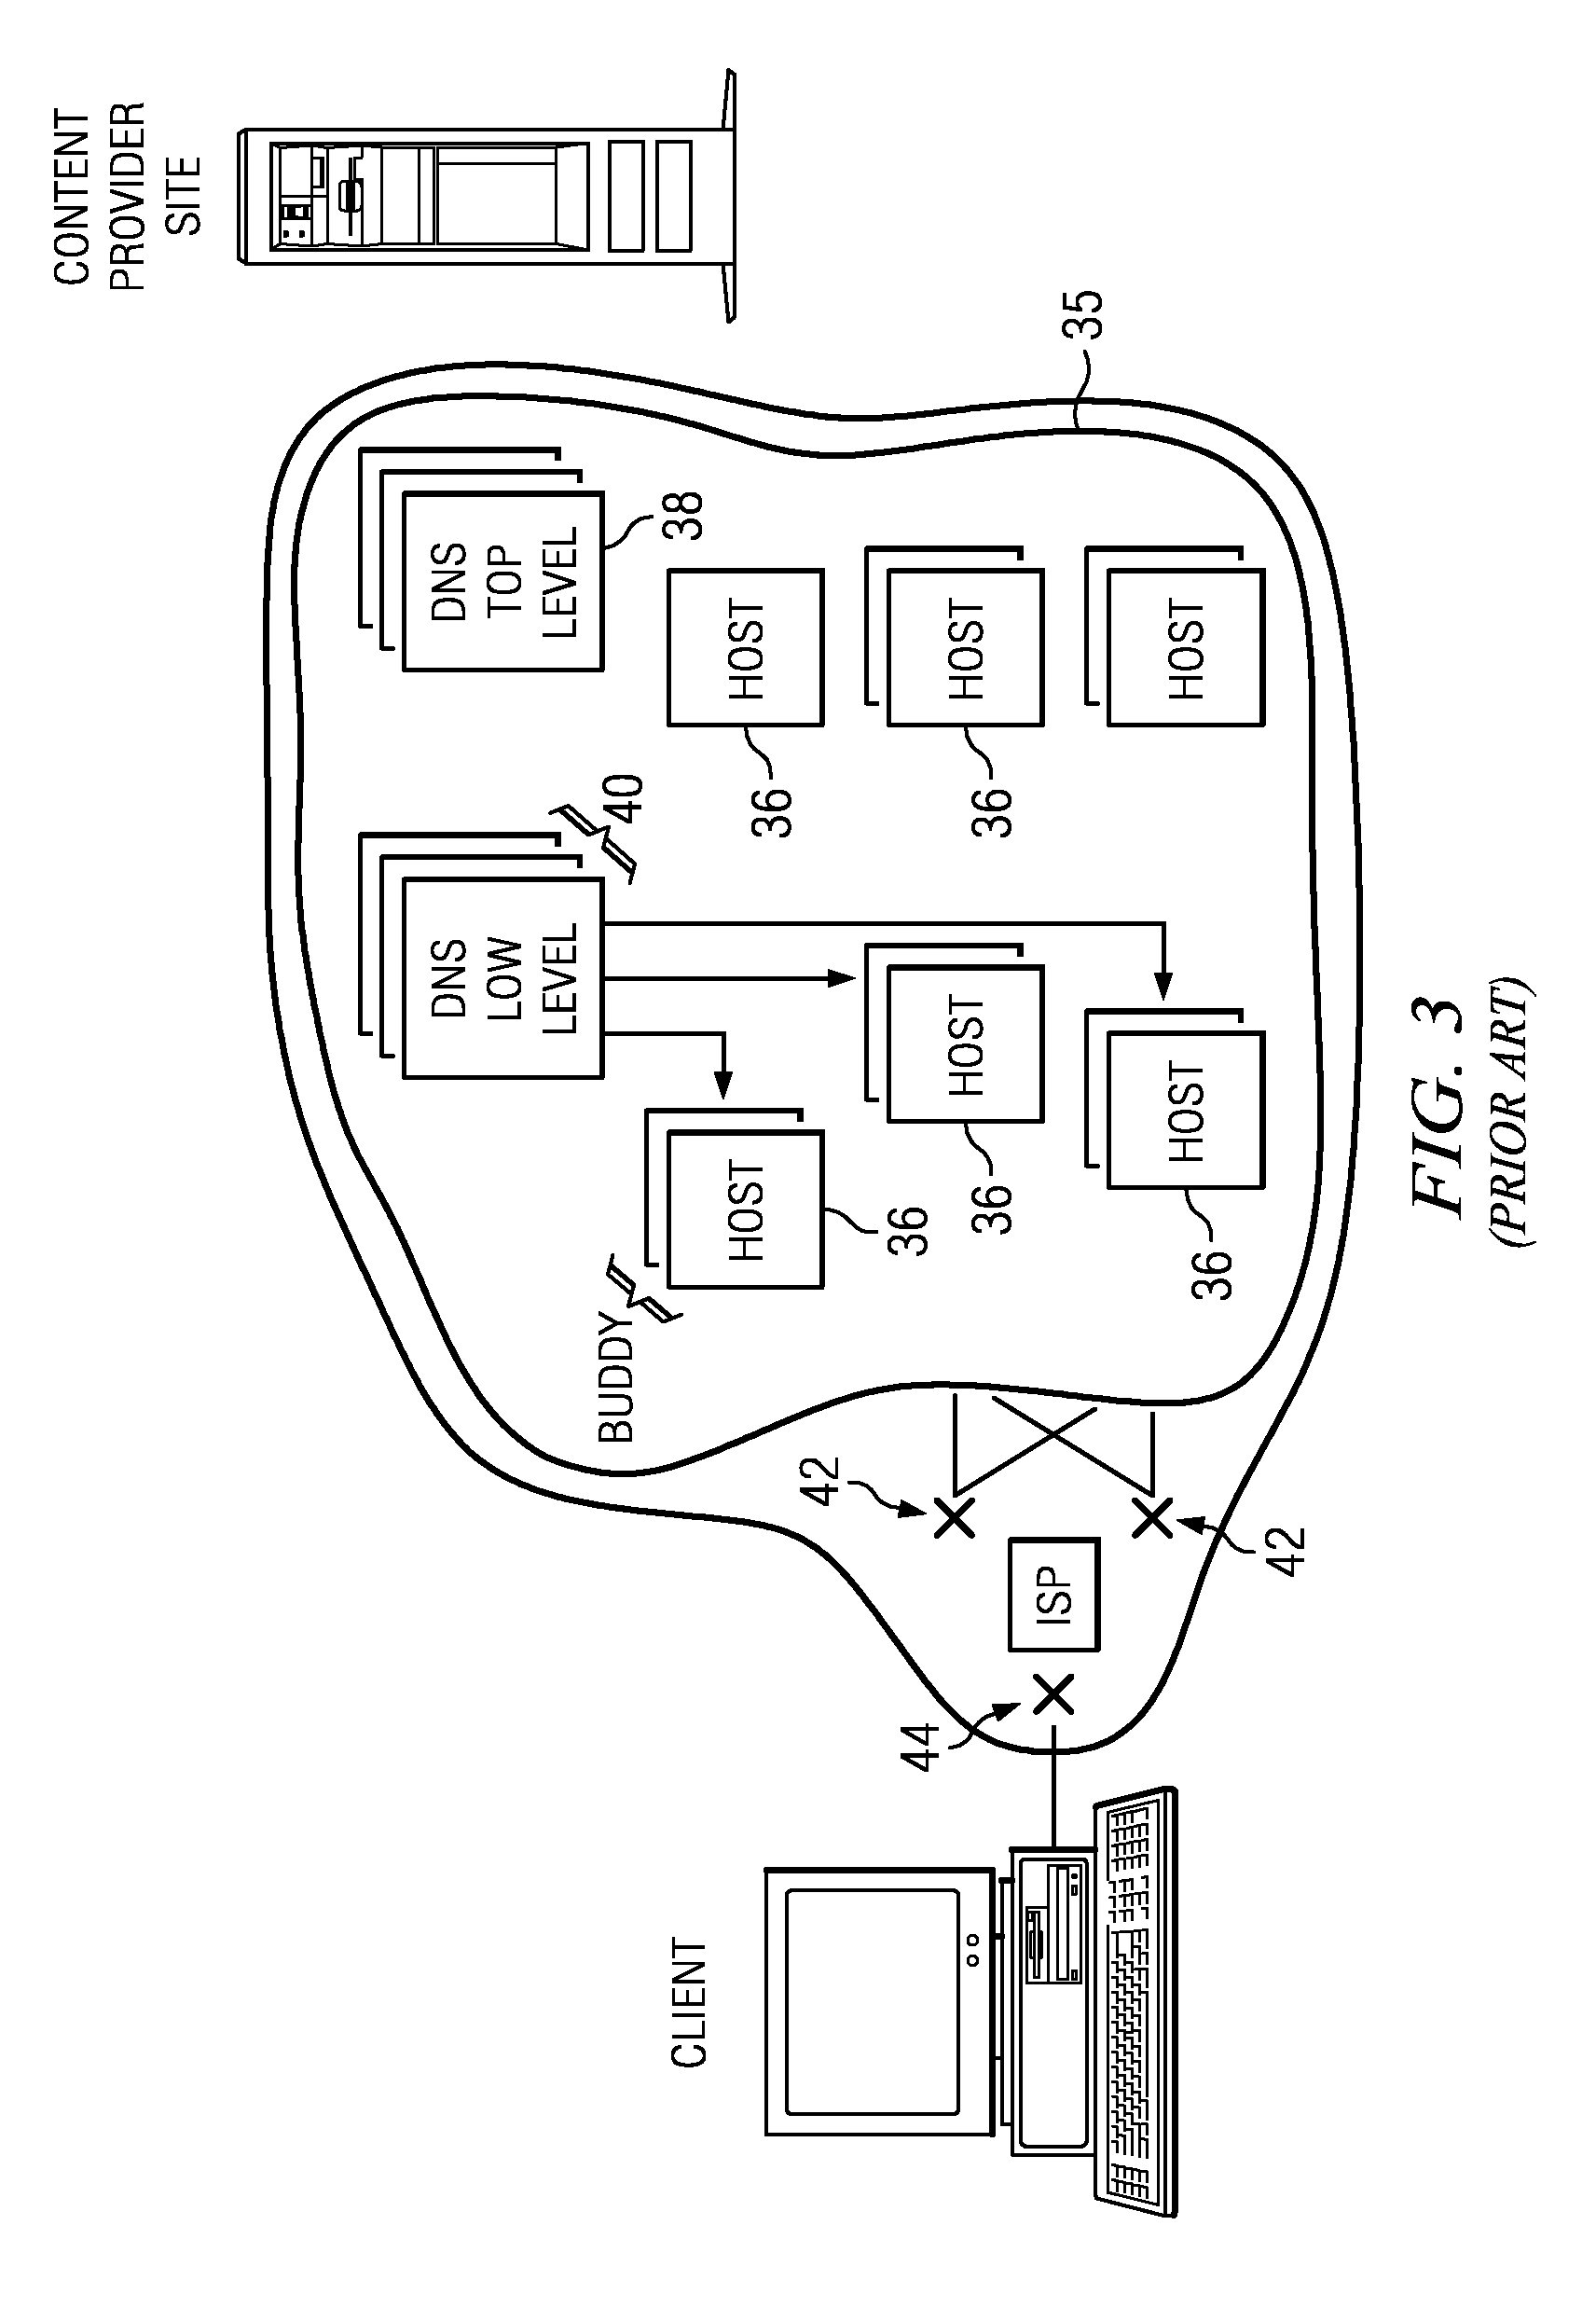 Network performance monitoring in a content delivery system